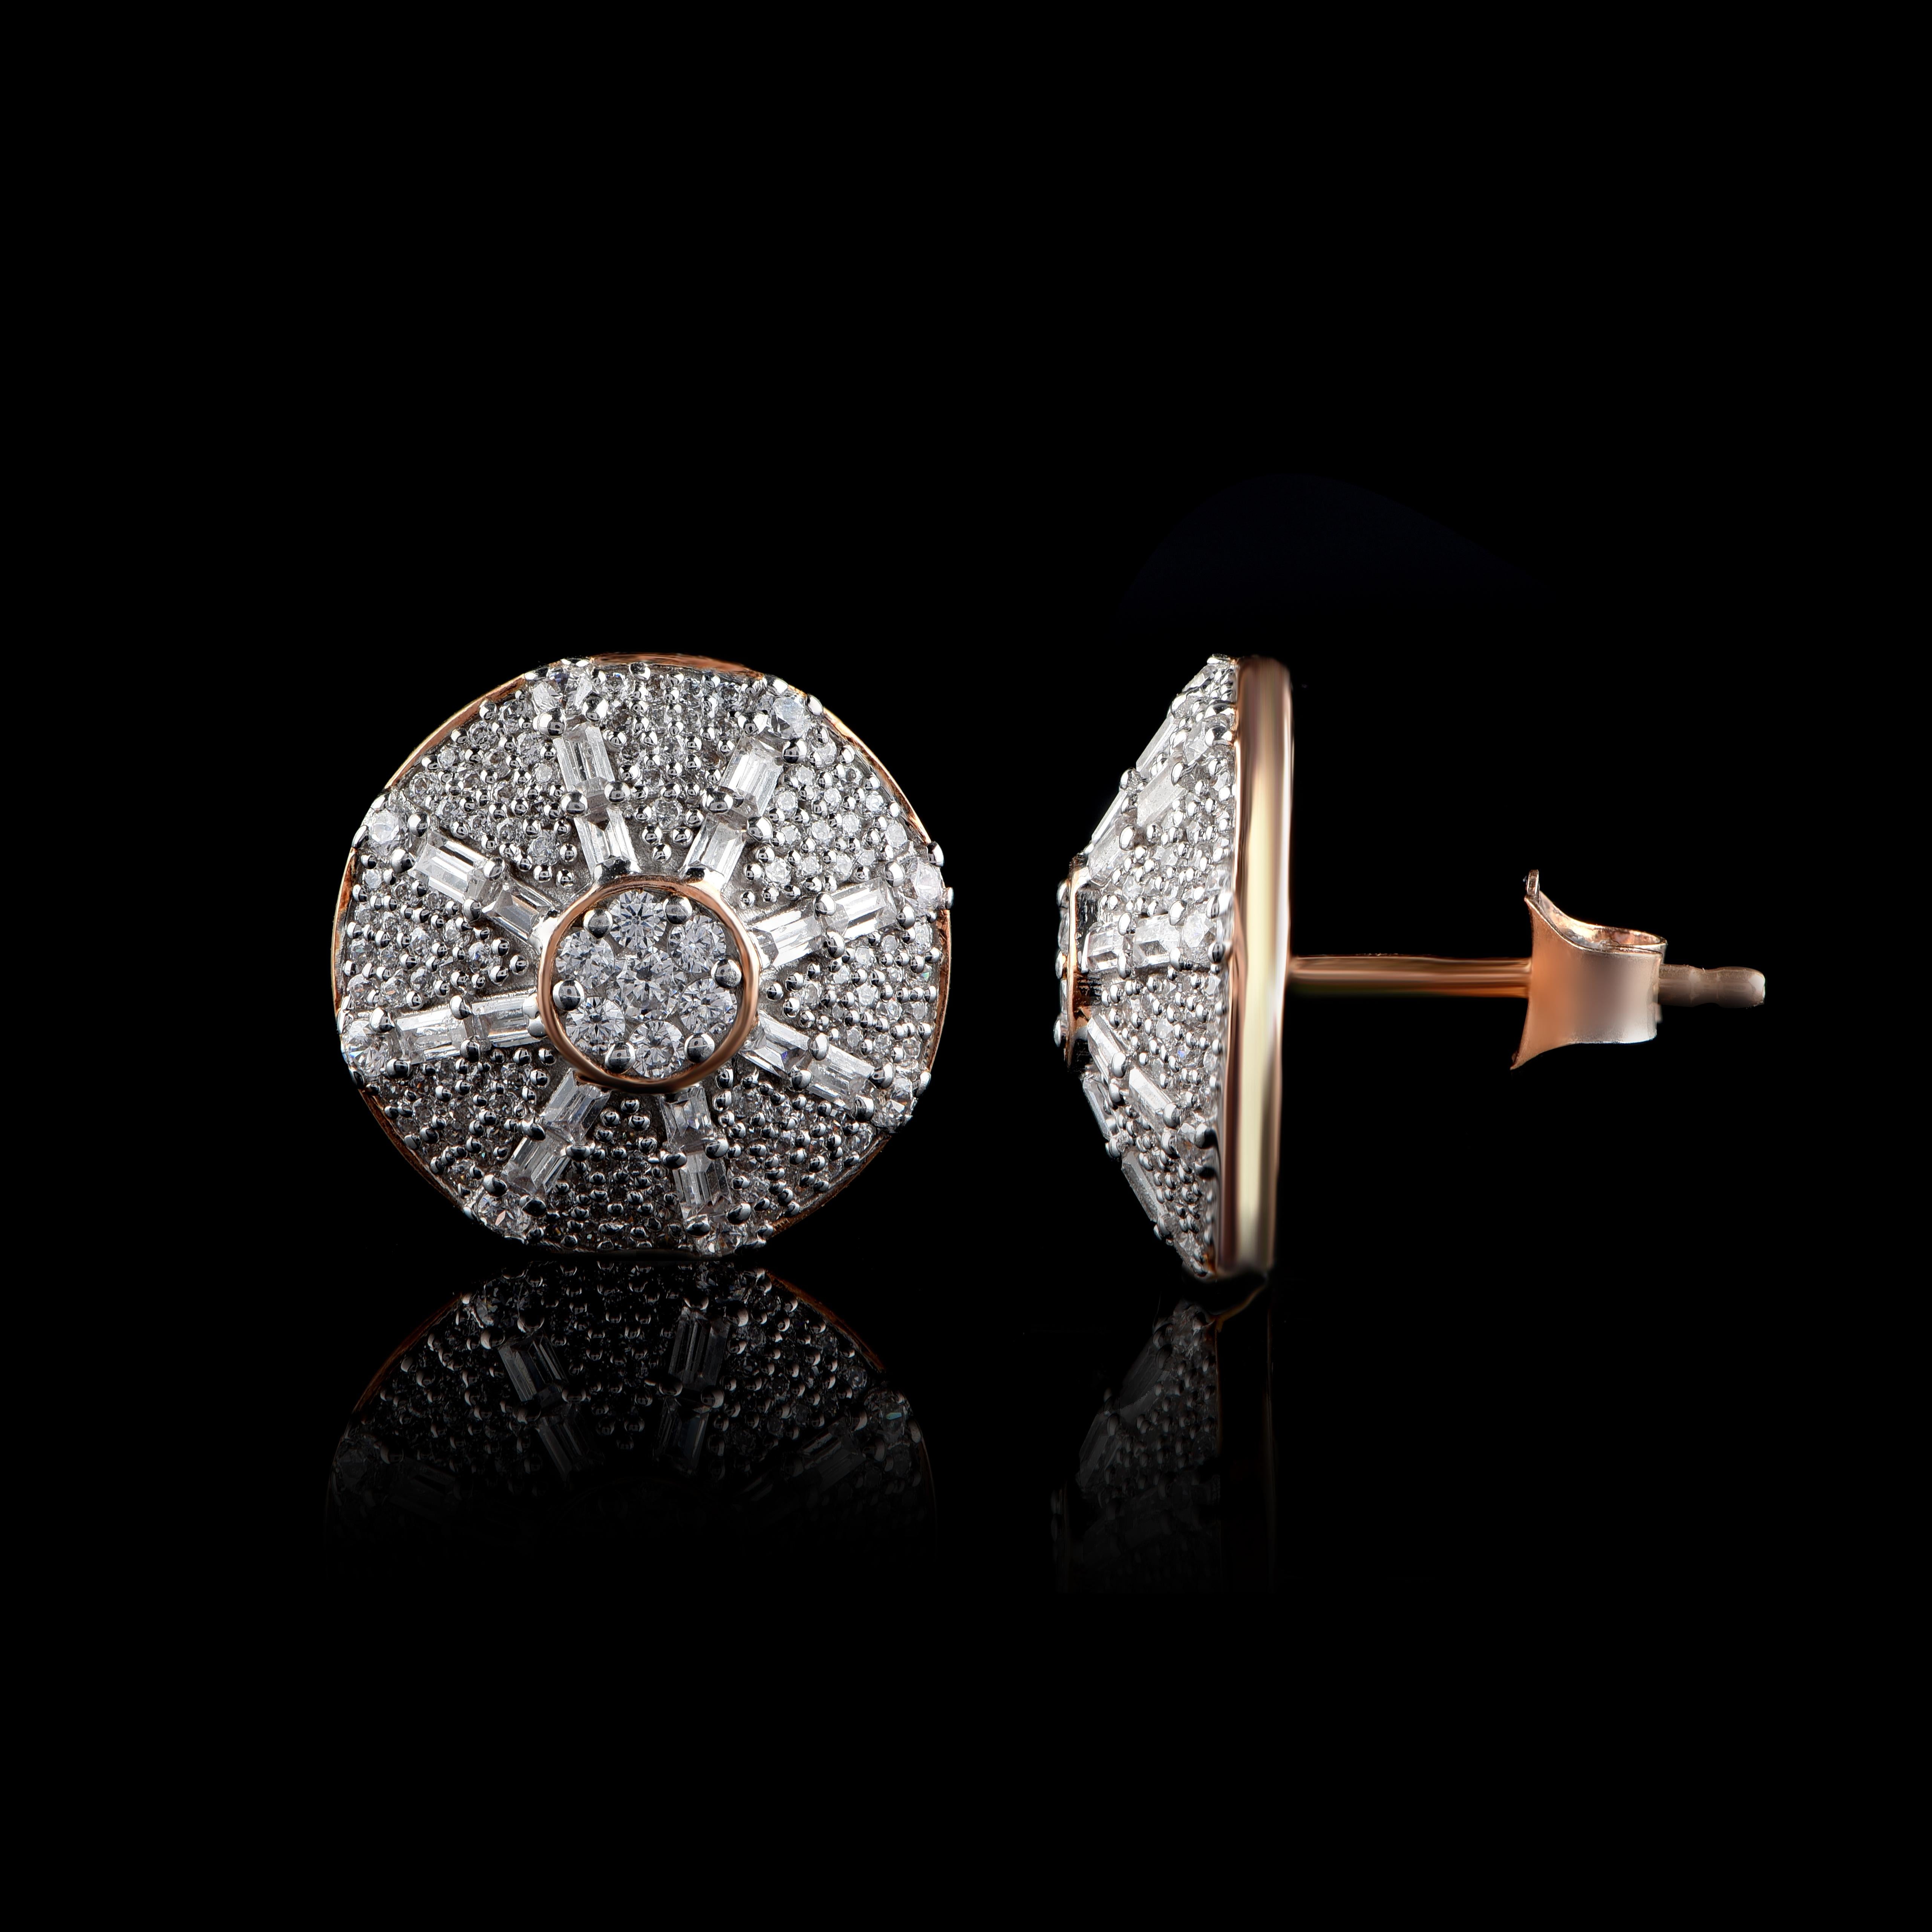 These beautiful stud earrings dazzle with 254 brilliant cut and 32 baguette-cut diamonds elegantly set in pressure, pave and prong setting. Designed and made by our expert craftsmen in 18-karat rose gold. The diamonds are graded H-I Color, I2